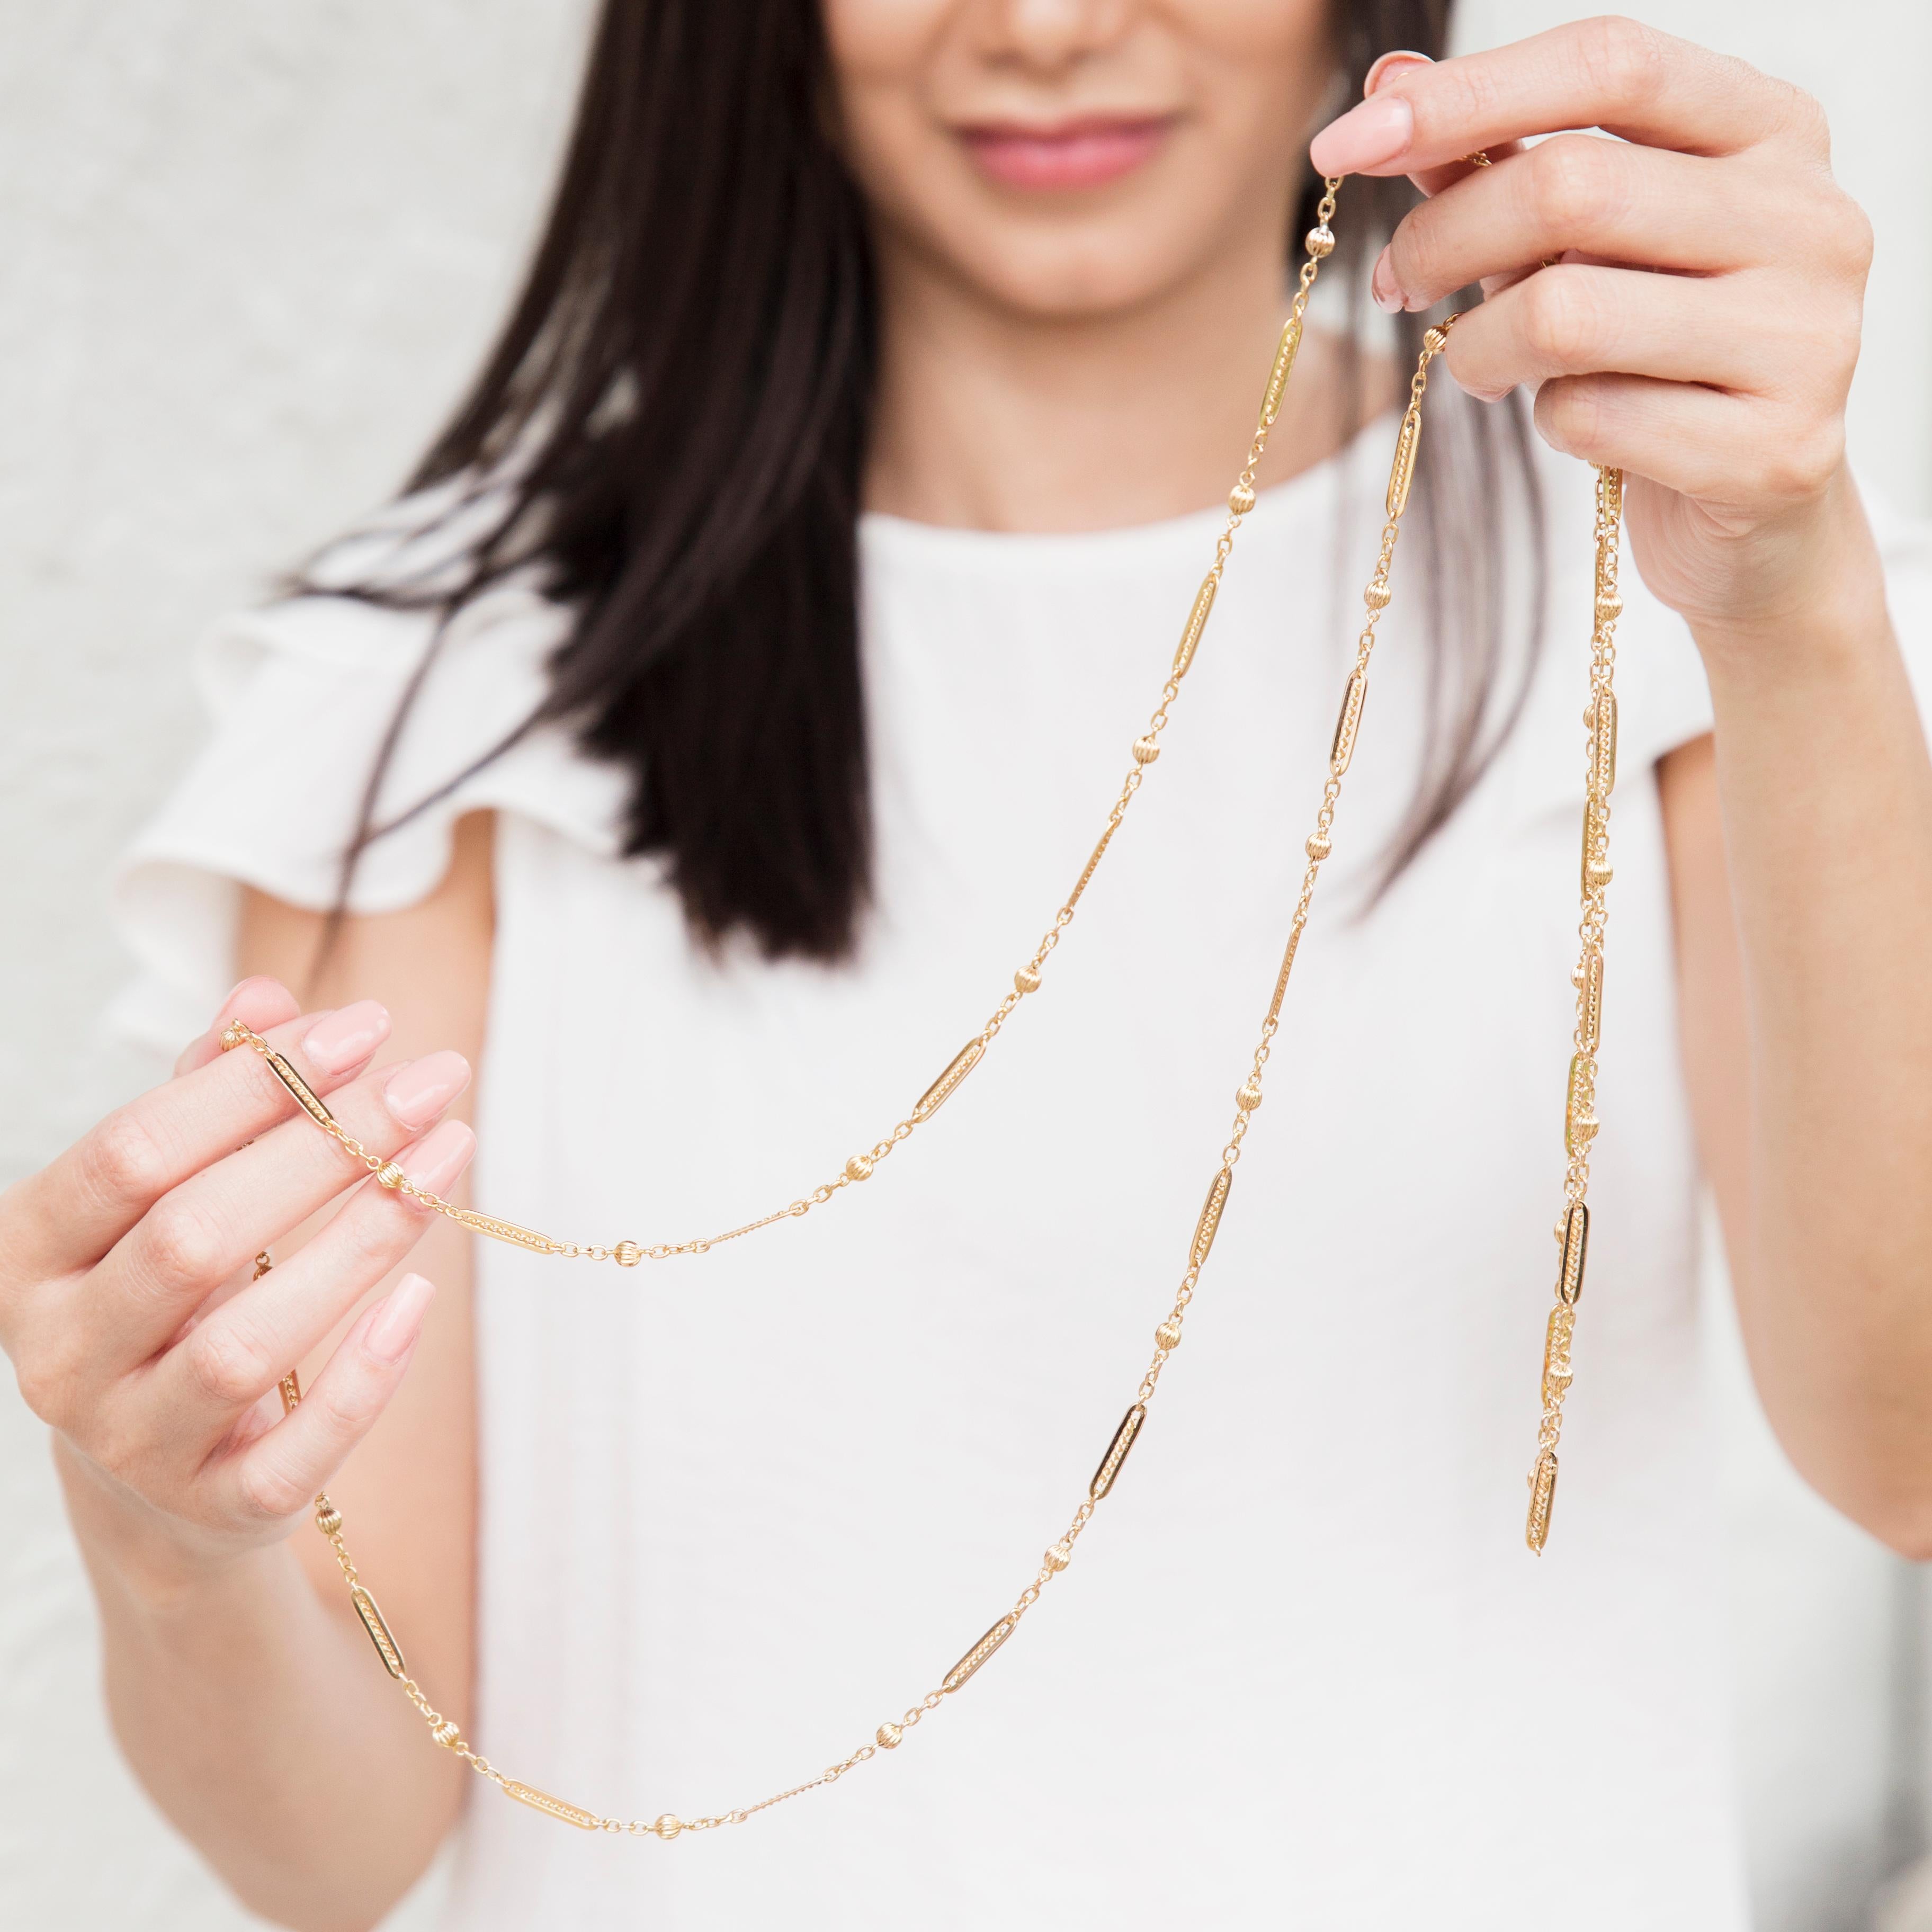 Forged in 15 carat yellow gold, Circa 1930s, this nostalgic vintage muff chain is an alternating series of modified paper clip link and fluted balls. This classic necklace is named The Millie Necklace. Her length lends herself to a plethora of